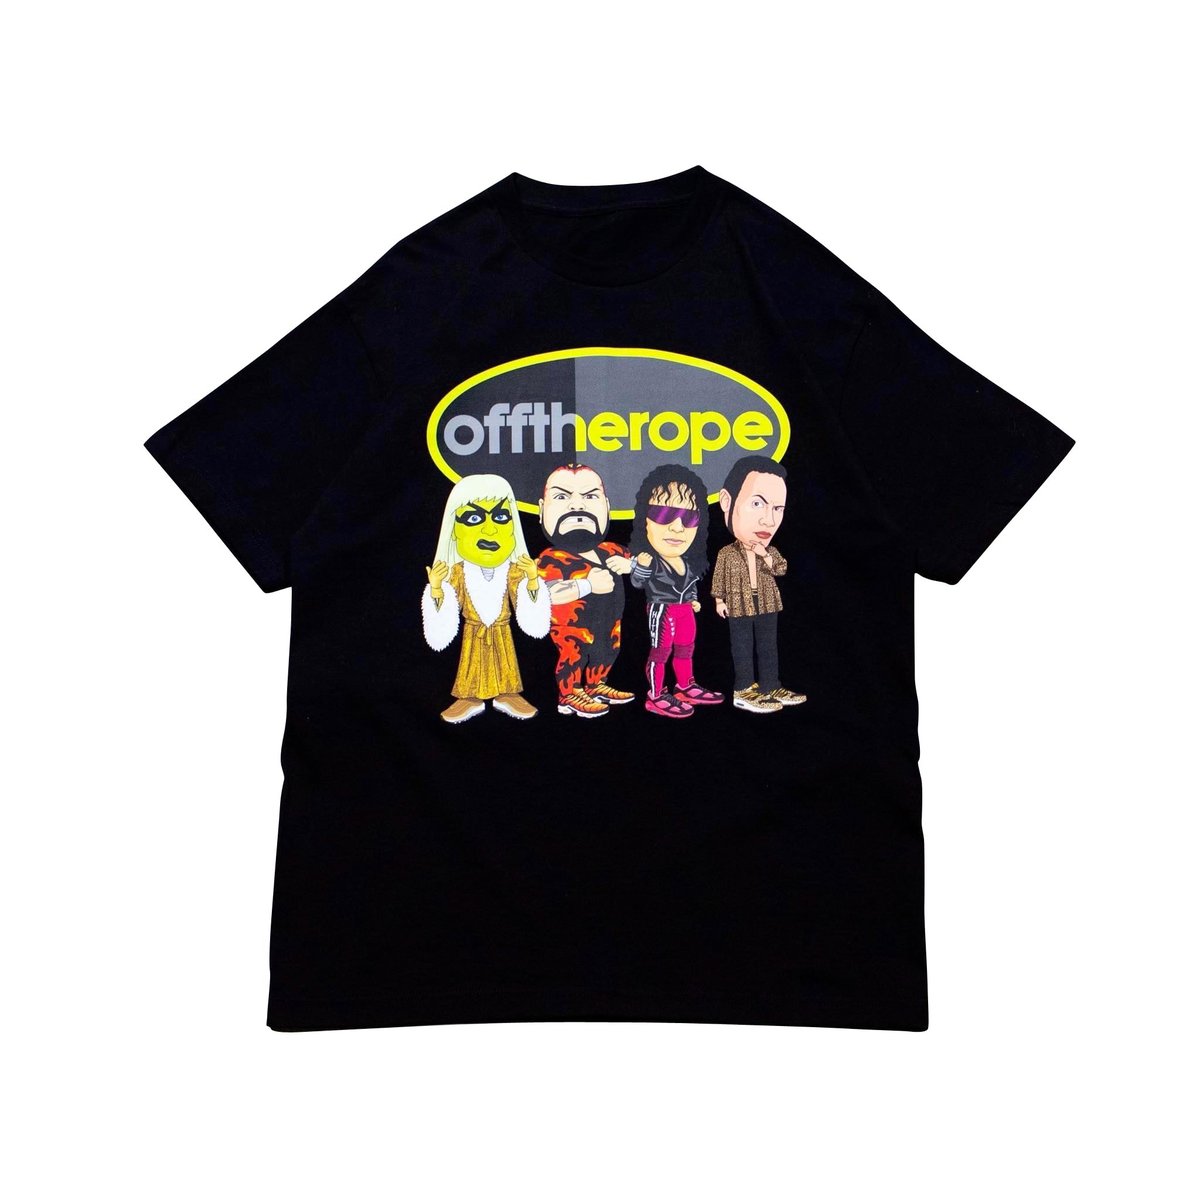 www.offtherope.com